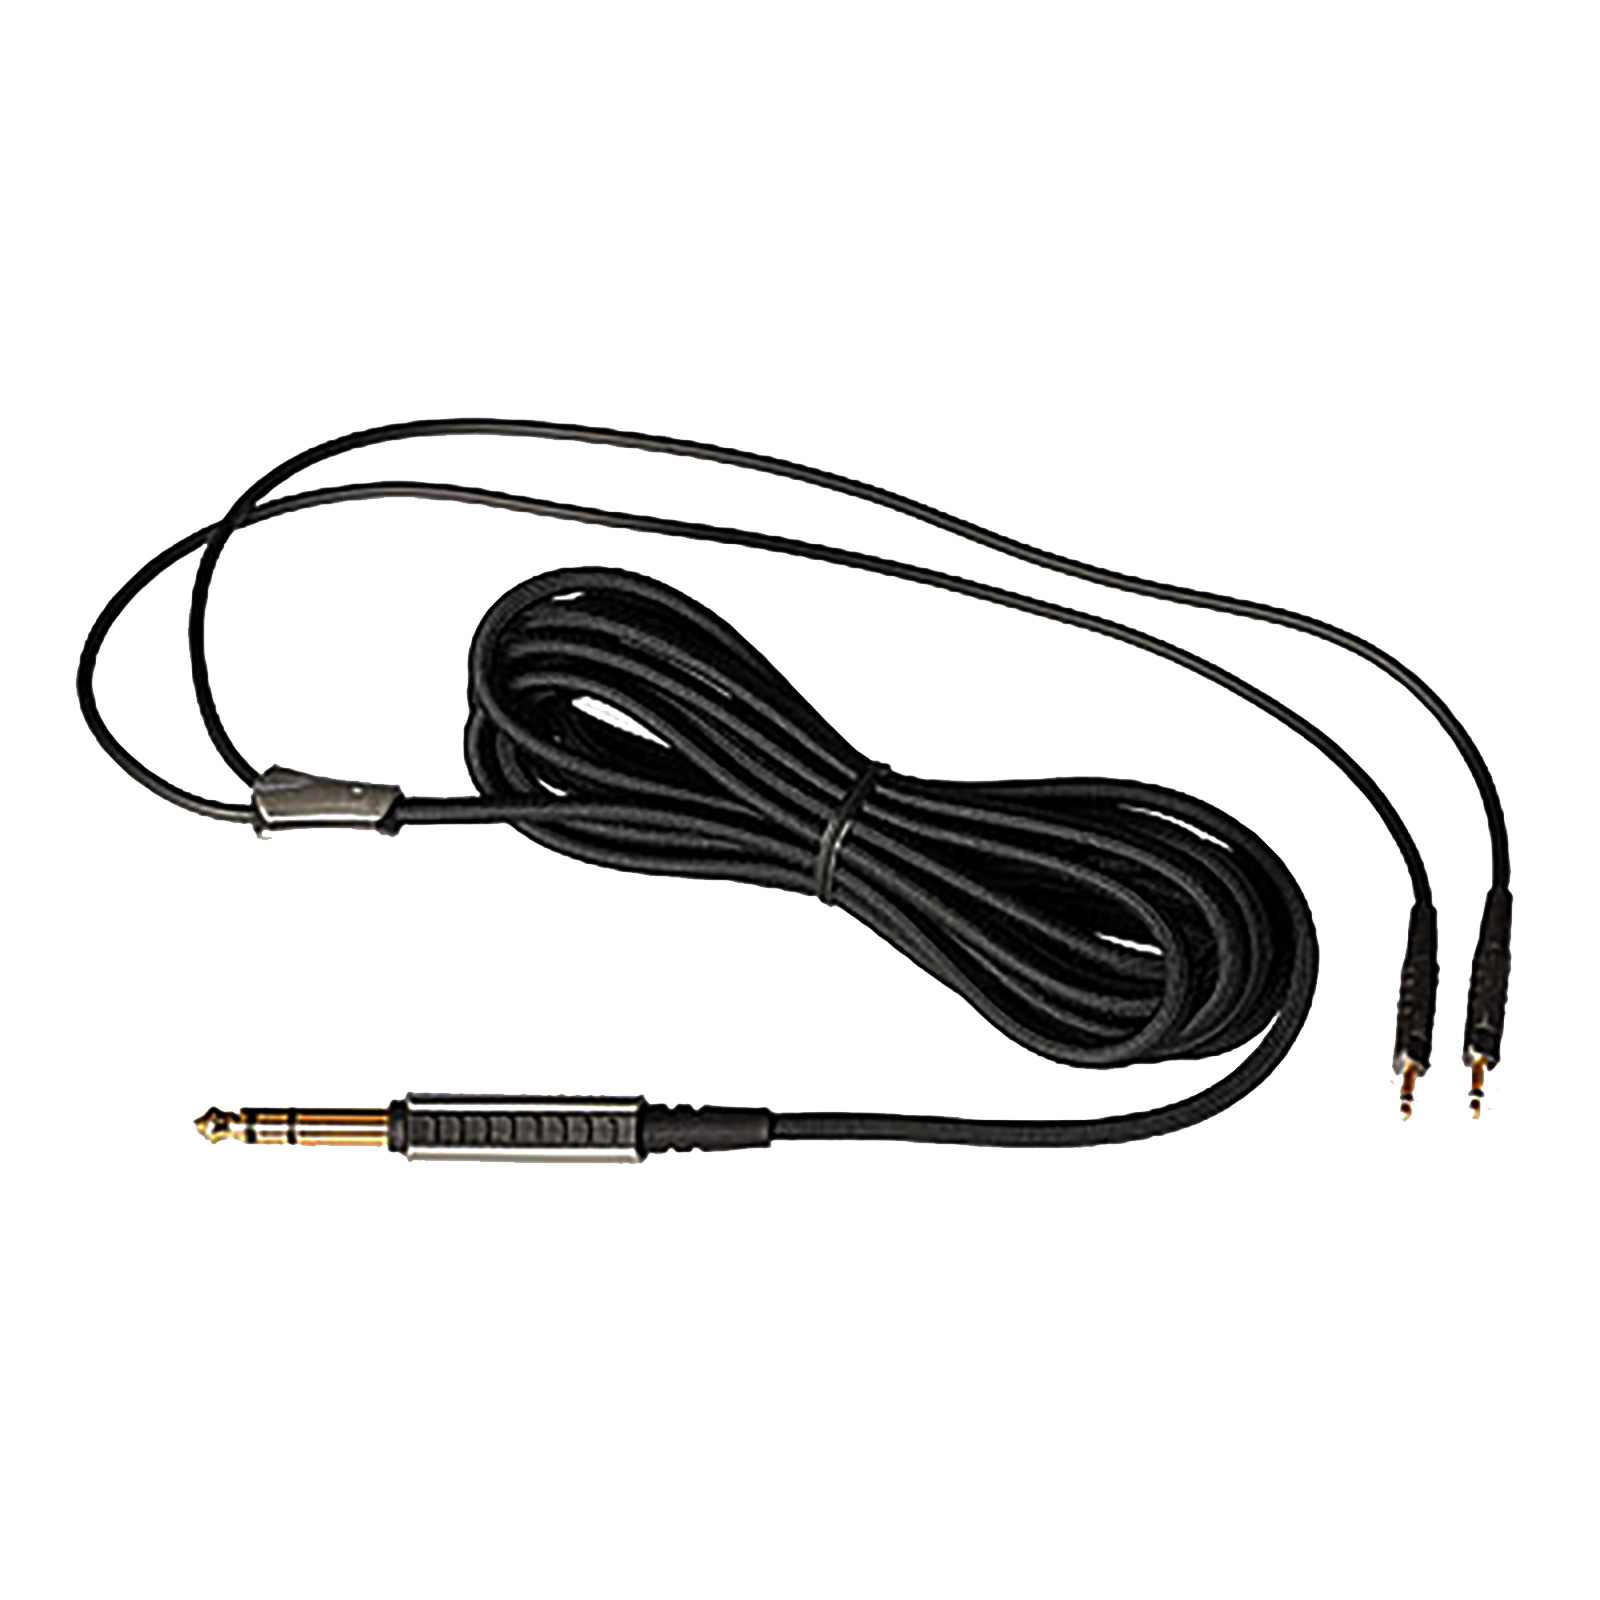 Official Replacement Hd700 Headphone Cable 6 35 Plug By Sennheiser Audio Sanctuary